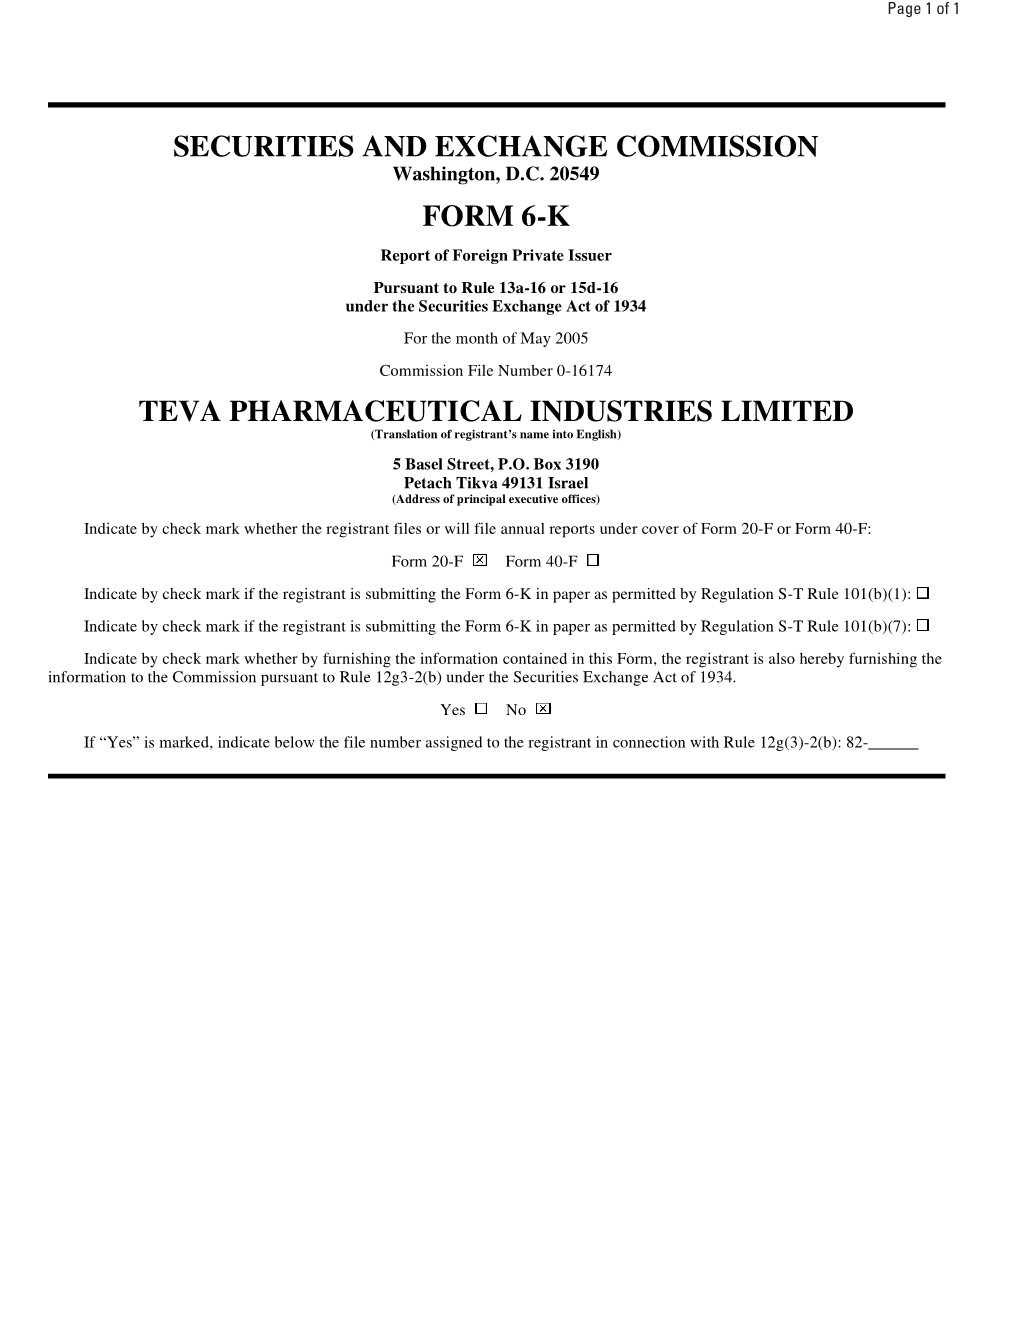 Securities and Exchange Commission Form 6-K Teva